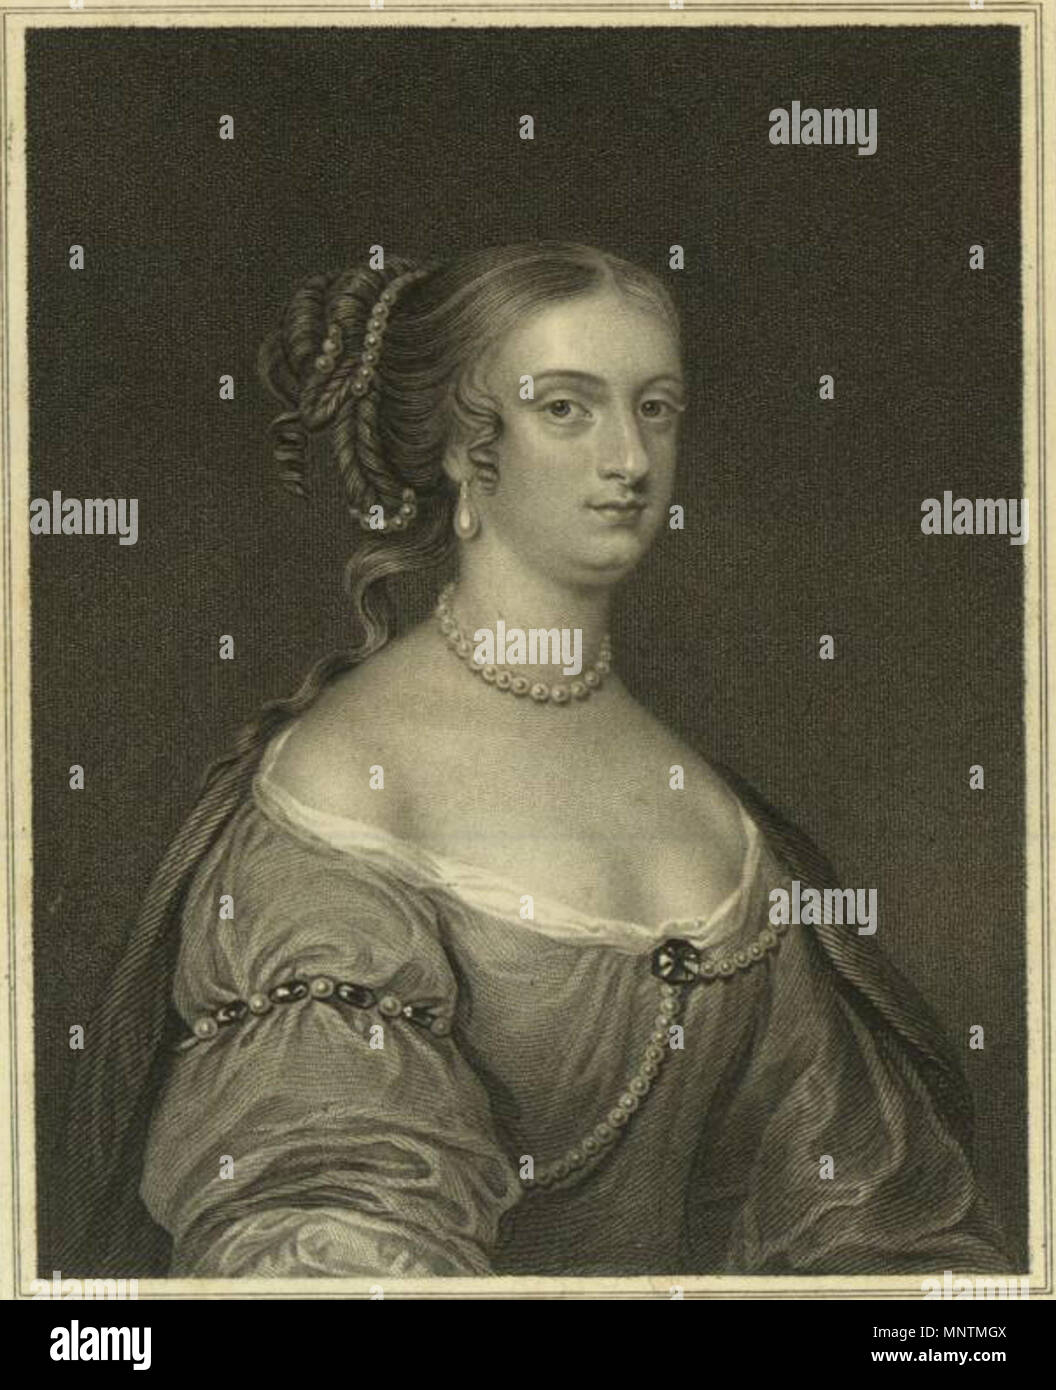 . Portrait of Rachel Wriothesley, Lady Russell. Engaved by John Cochran after a portrait by Samuel Cooper. Engraving, mid-19th century; portrait, 17th century.    John Cochran (active 1821-1865)     Description Scottish miniaturist and engraver    After Samuel Cooper  (1609–1672)     Alternative names Samuel Cowper  Description English portrait painter, draughtsman, aquarellist and miniaturist brother of Alexander Cooper  Date of birth/death 1608 or 1609 5 May 1672  Location of birth/death London London  Authority control  : Q1382316 VIAF: 54942268 ISNI: 0000 0001 1646 3841 ULAN: 500115383 LCC Stock Photo